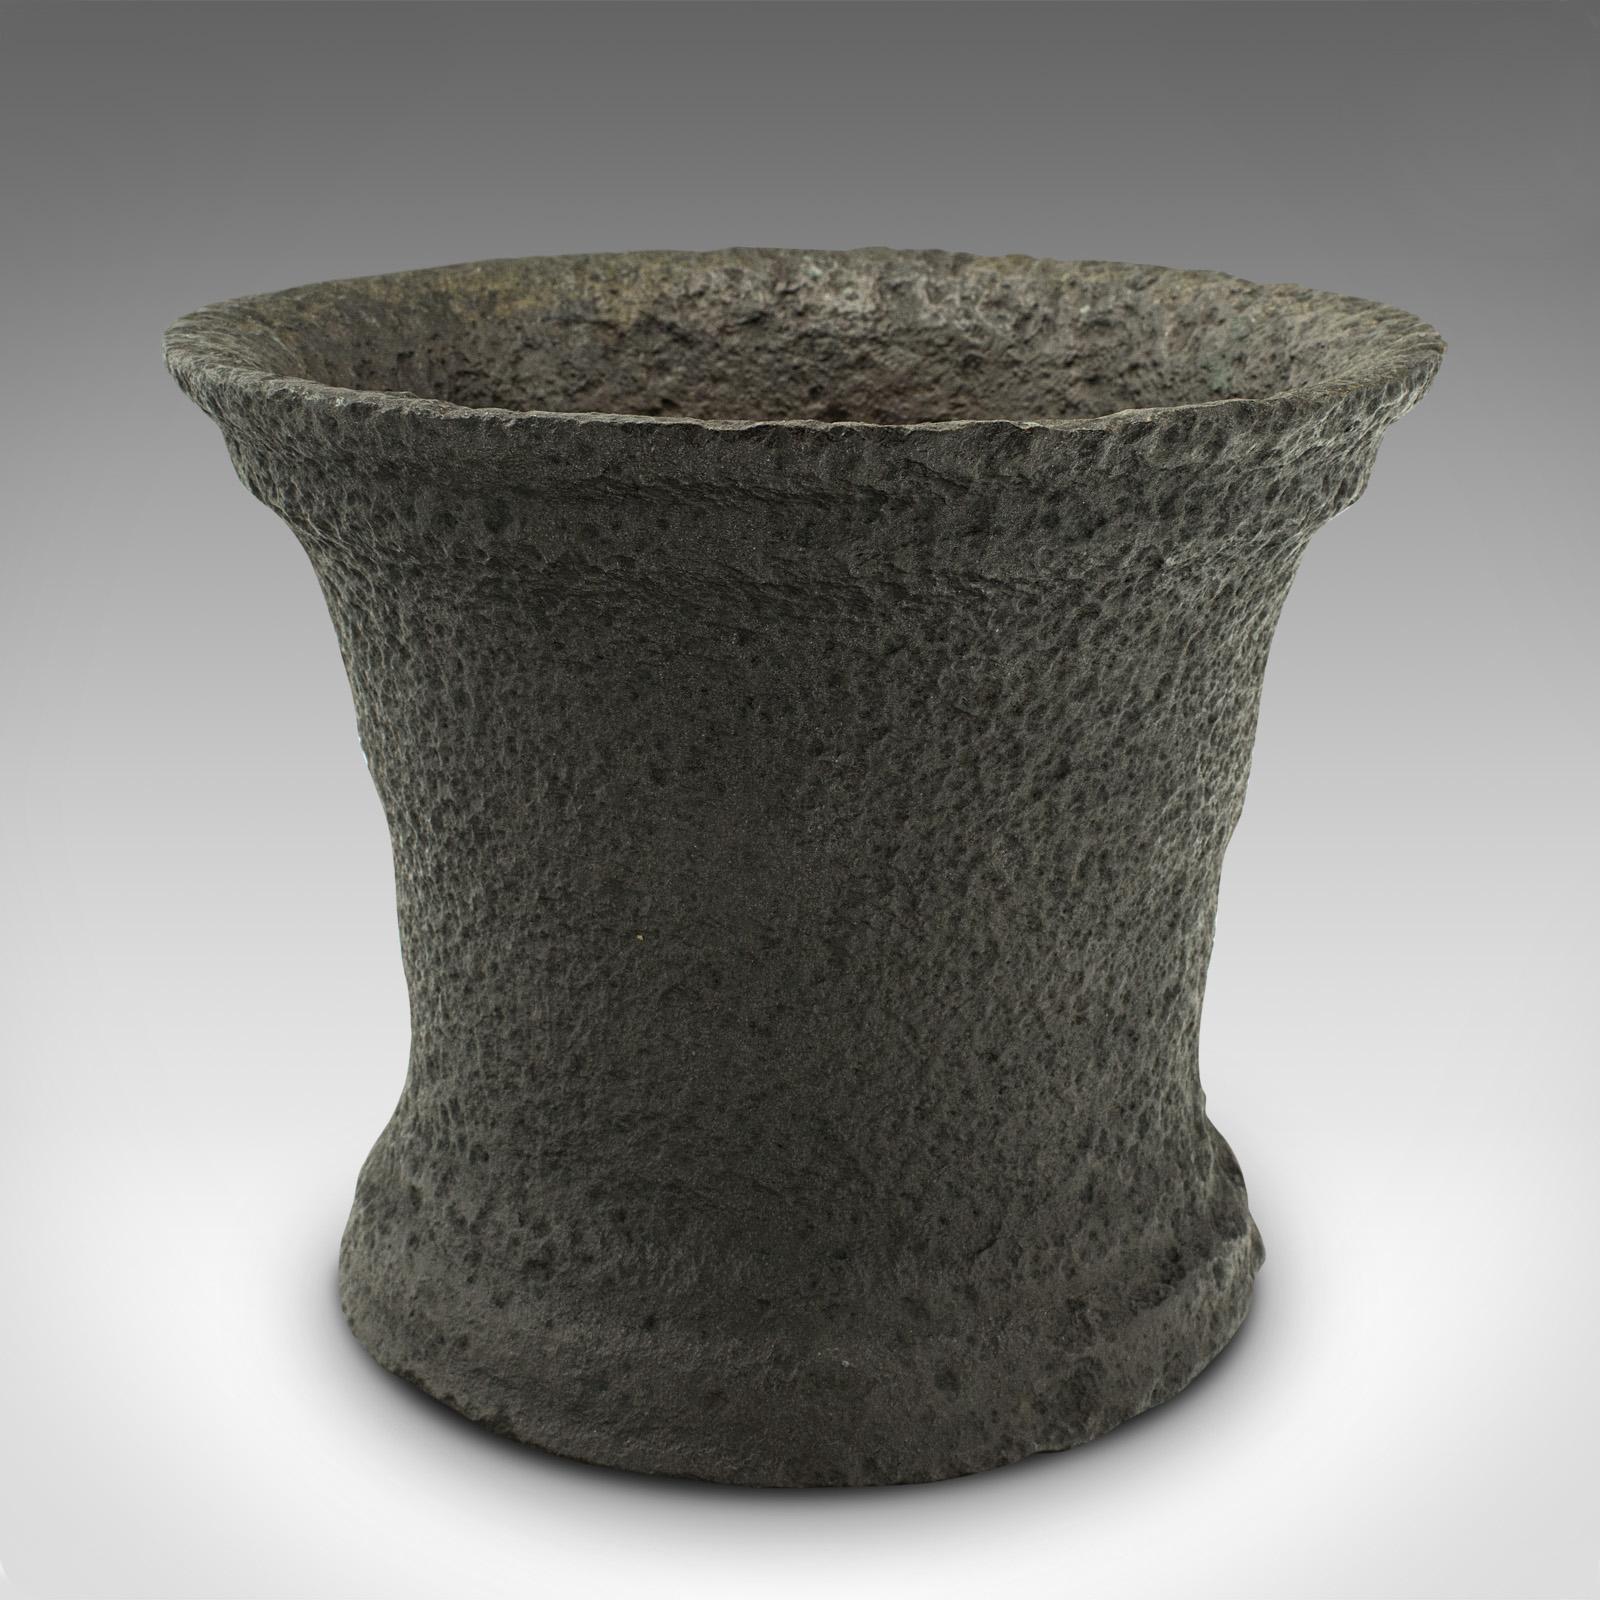 This is a heavy antique mortar. An English, cast iron planter pot, dating to the mid Georgian period, circa 1750.

Of superb weight with an appealing weathered appearance
Displays a desirable aged patina and in good order
Robust cast iron